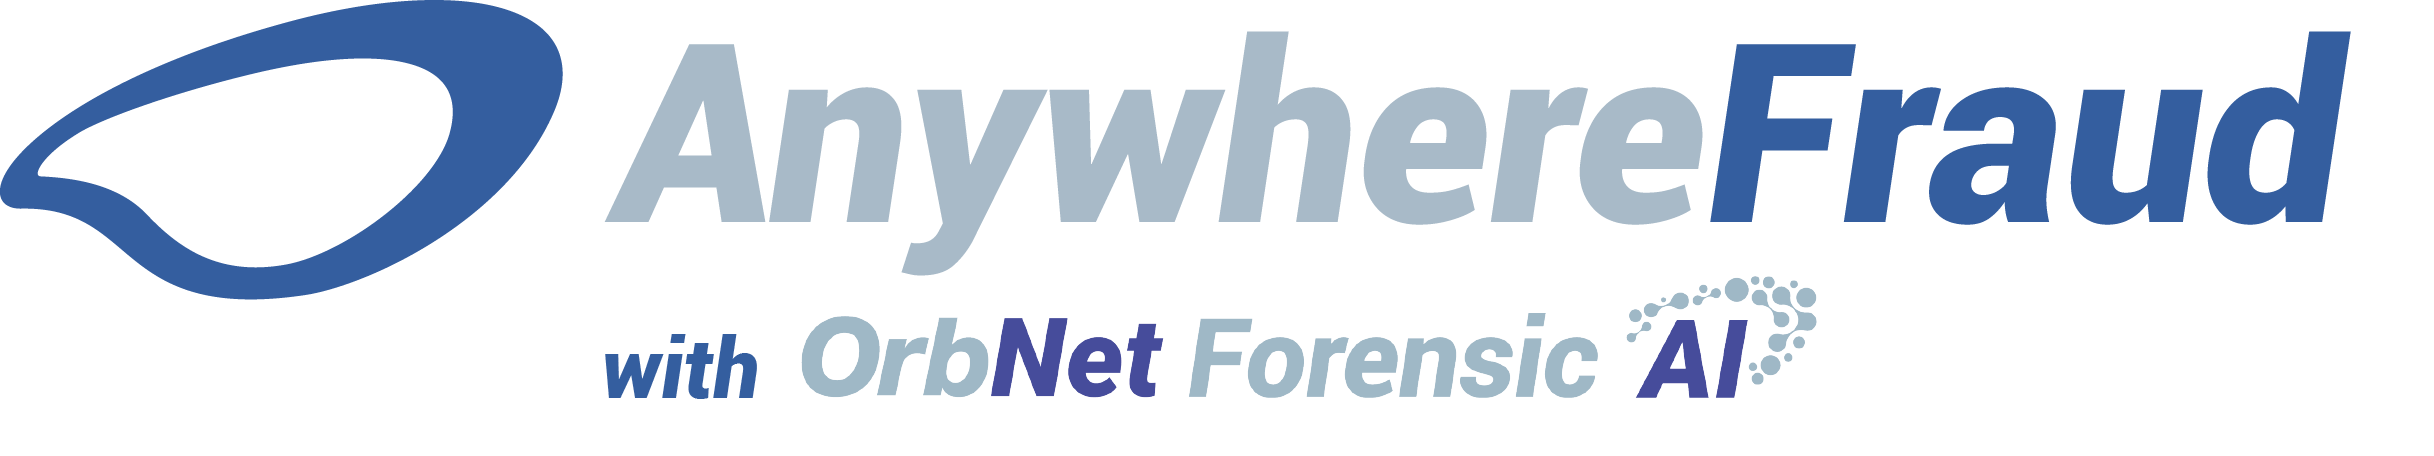 Anywhere Fraud with OrbNet Forensic AI